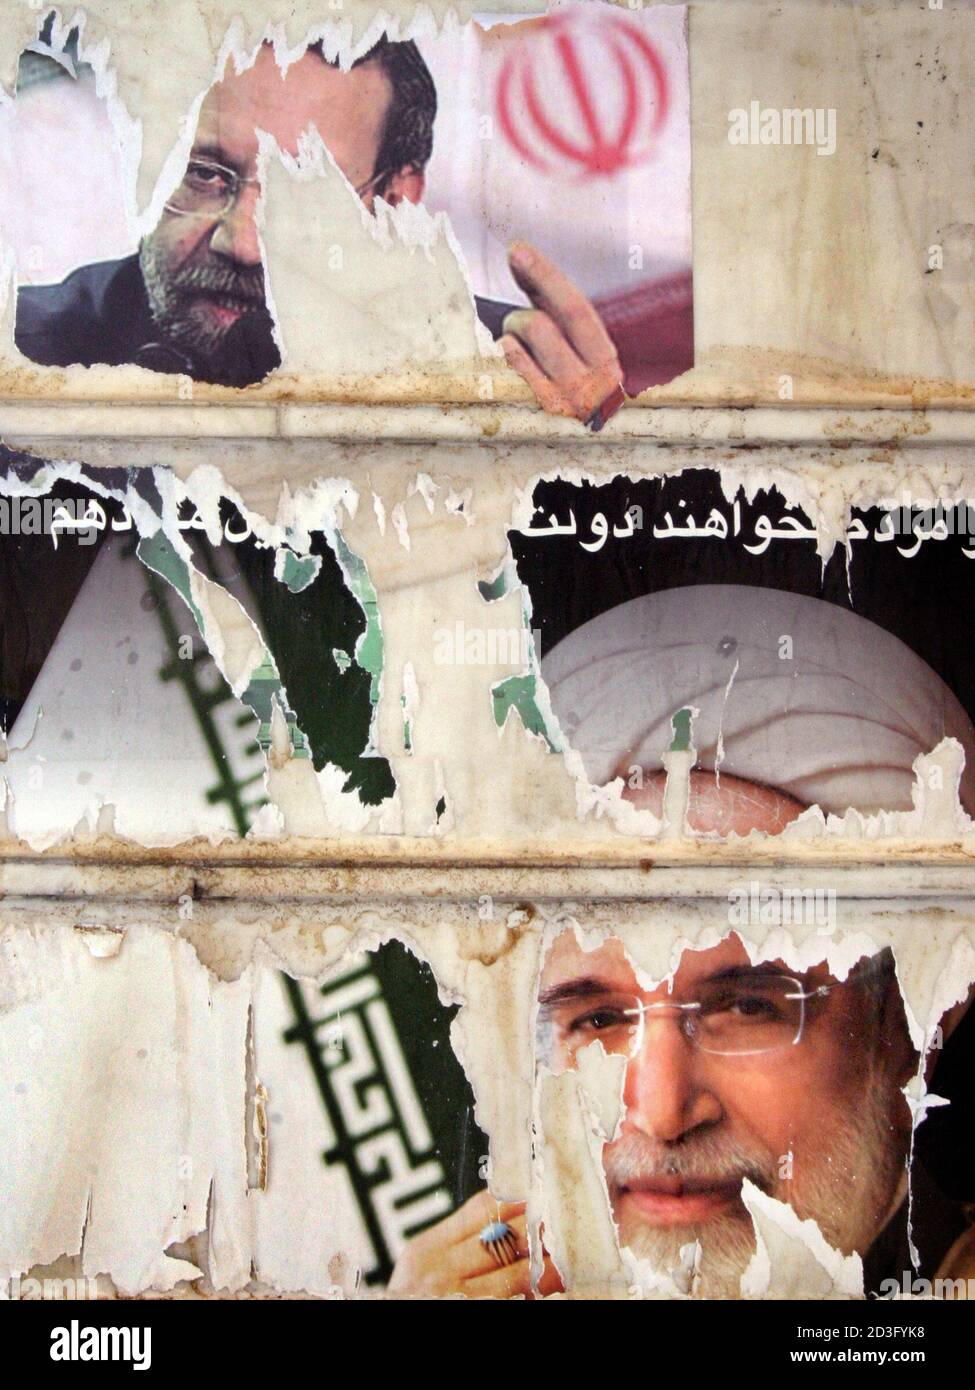 Torn campaign posters line the walls of Damavand, 60 km (37 miles) east of Tehran, June 15 2005. The campaign began almost as a one-horse race, but after more than two weeks of campaigning that ended on Thursday, Akbar Hashemi Rafsanjani's lead has sharply eroded and his chances of securing the 50 percent vote needed for a first-round win seem slim. The race is the tightest in Iran's history with reformist Mostafa Moin and conservative Mohammad Baqer Qalibaf, who both ran vigorous campaigns, in second and third place according to opinion polls, although polls have been unreliable in the past.  Stock Photo